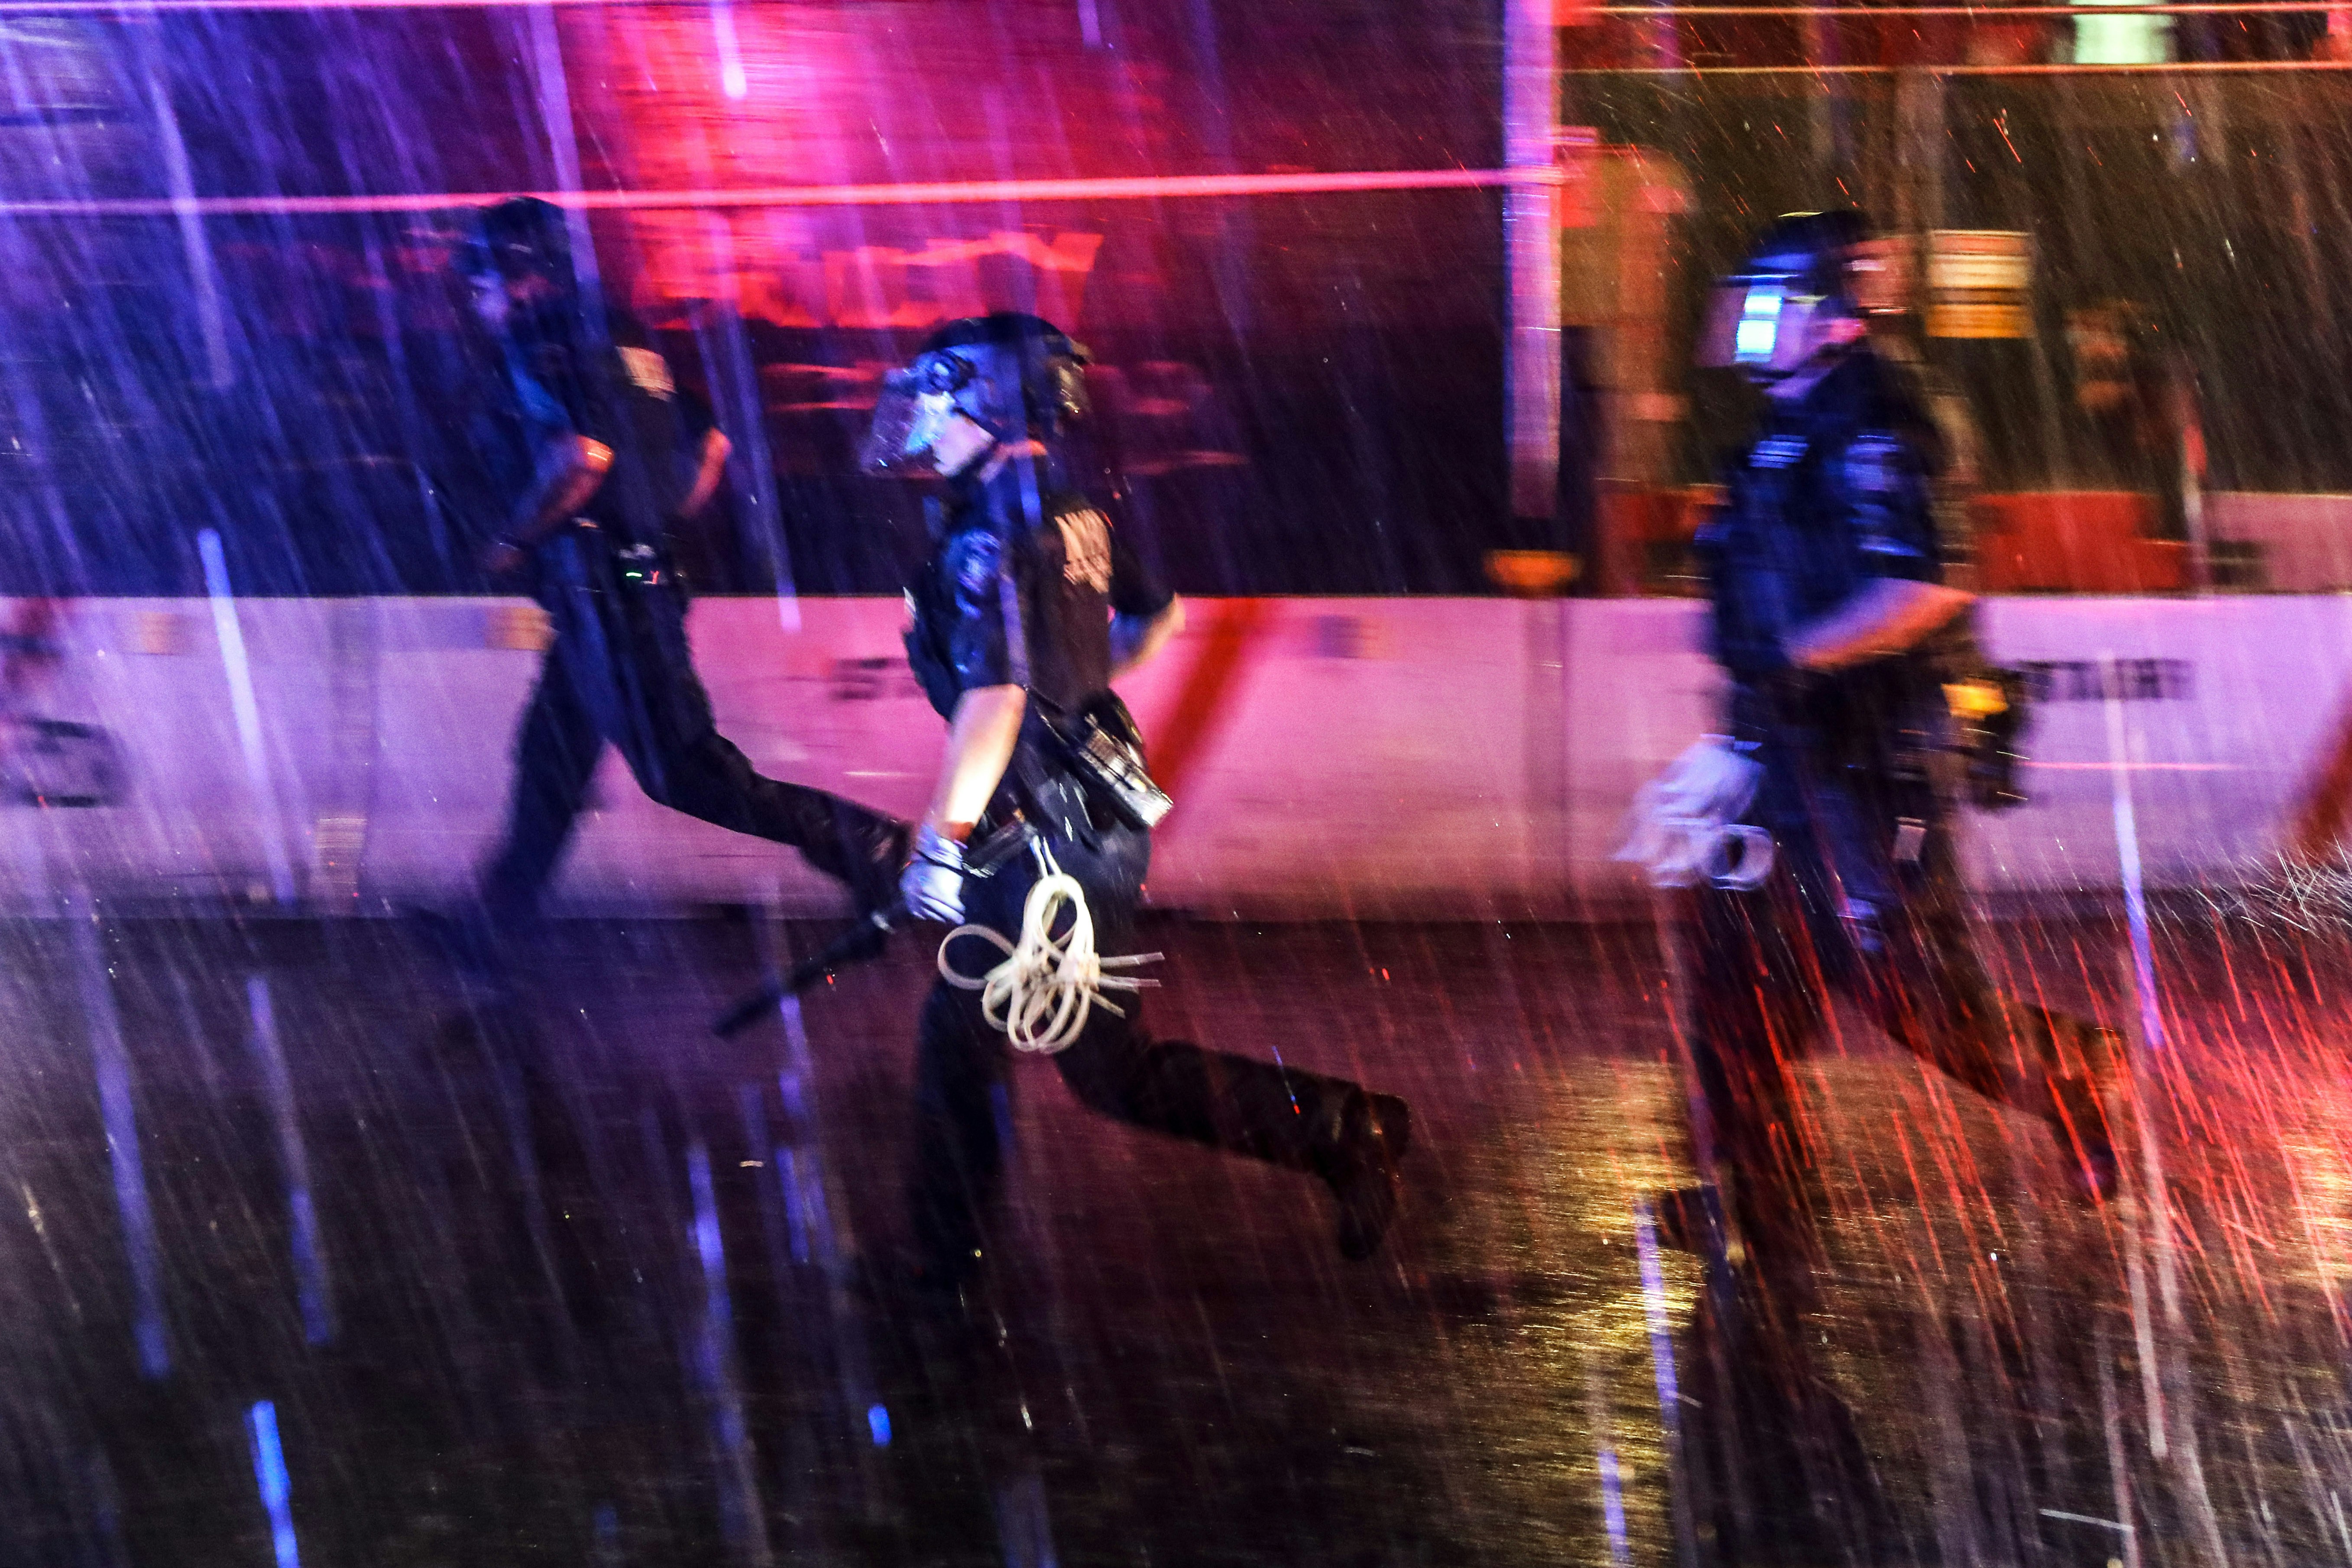 NEW YORK, NEW YORK - JUNE 03: Police chase after protesters in the rain as demonstrations continue in Manhattan over the killing of George Floyd by a Minneapolis Police officer on June 03, 2020 in New York City. The white police officer, Derek Chauvin, has been charged with second-degree murder and the three other officers who participated in the arrest have been charged with aiding and abetting second-degree murder. Floyd's death, the most recent in a series of deaths of African Americans at the hands of police, has set off days and nights of protests across the country.  (Photo by Spencer Platt/Getty Images)